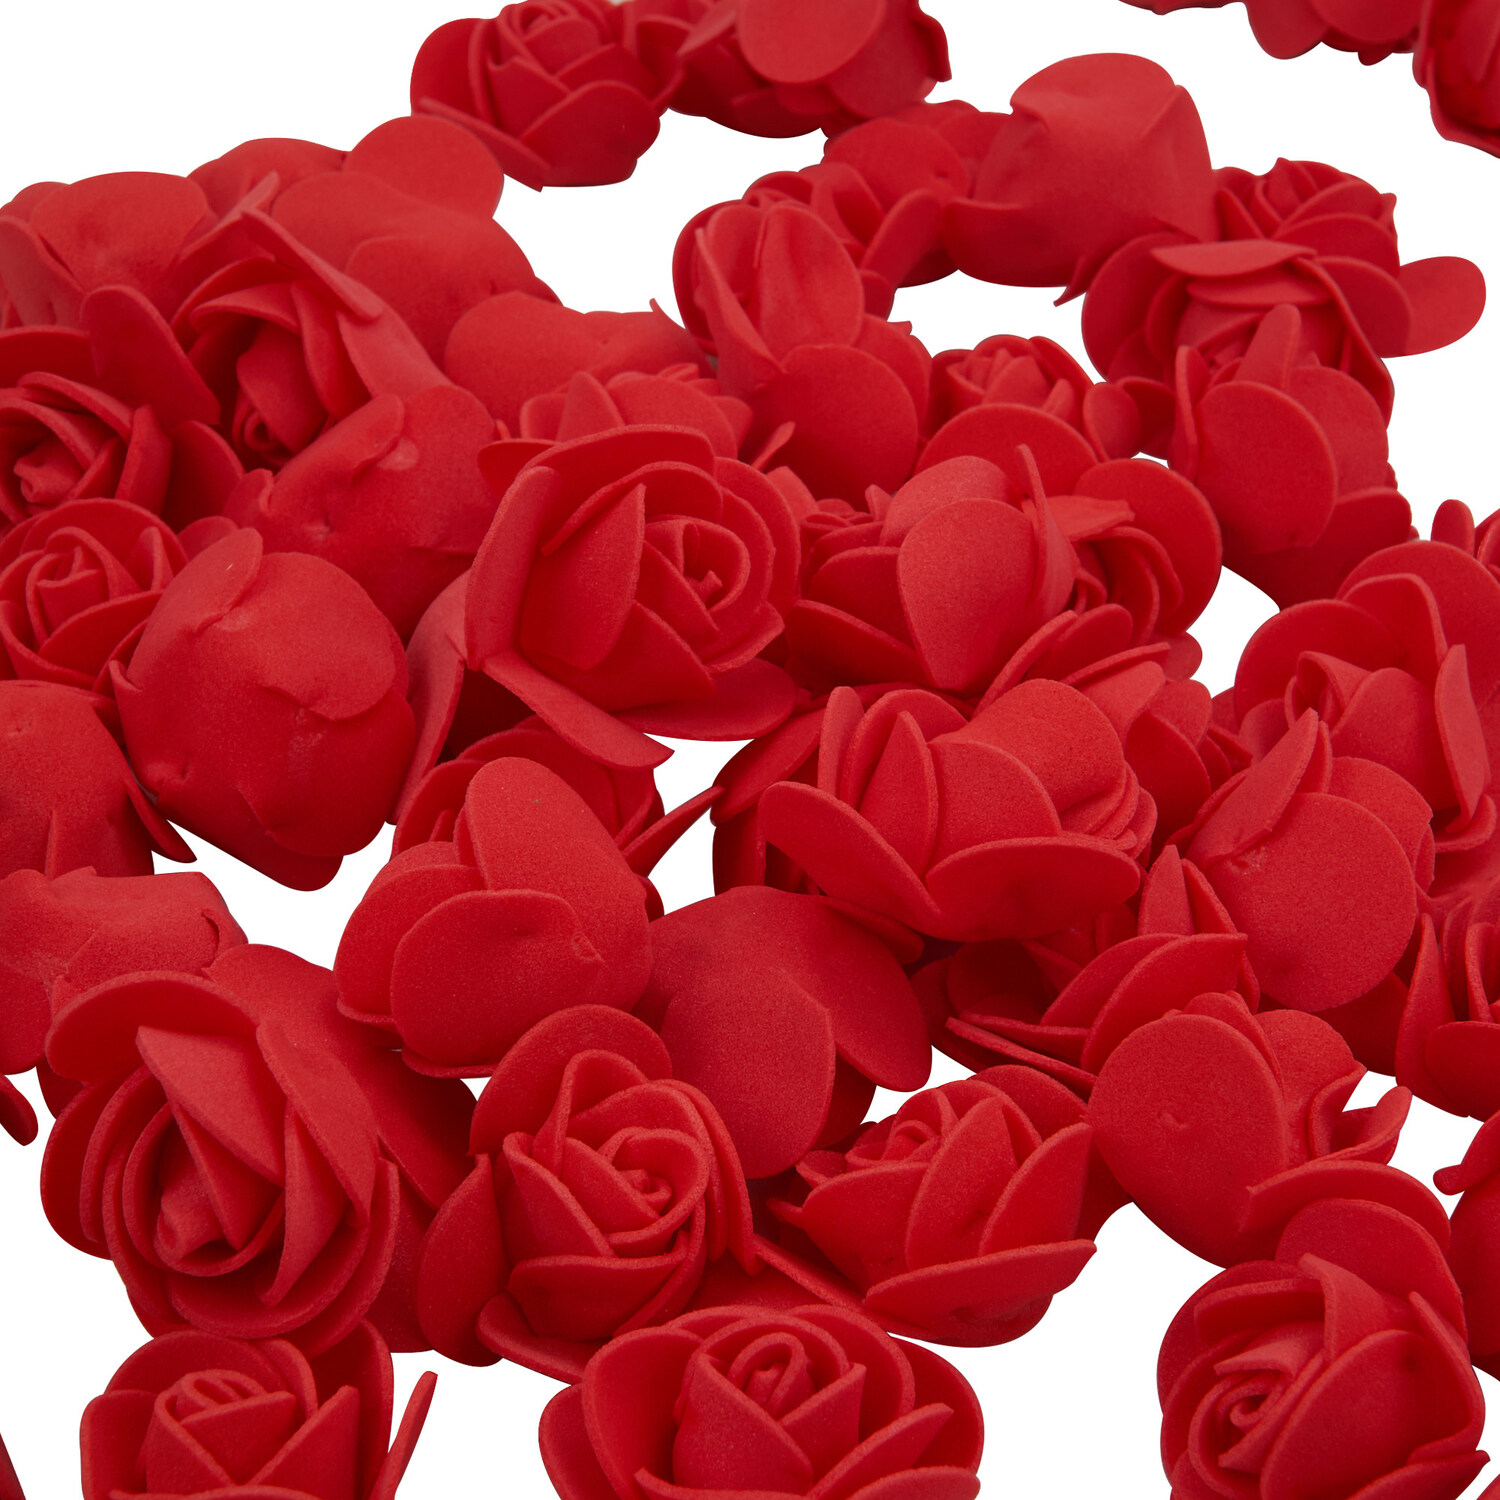 Small Red Foam Roses - Red Image 2